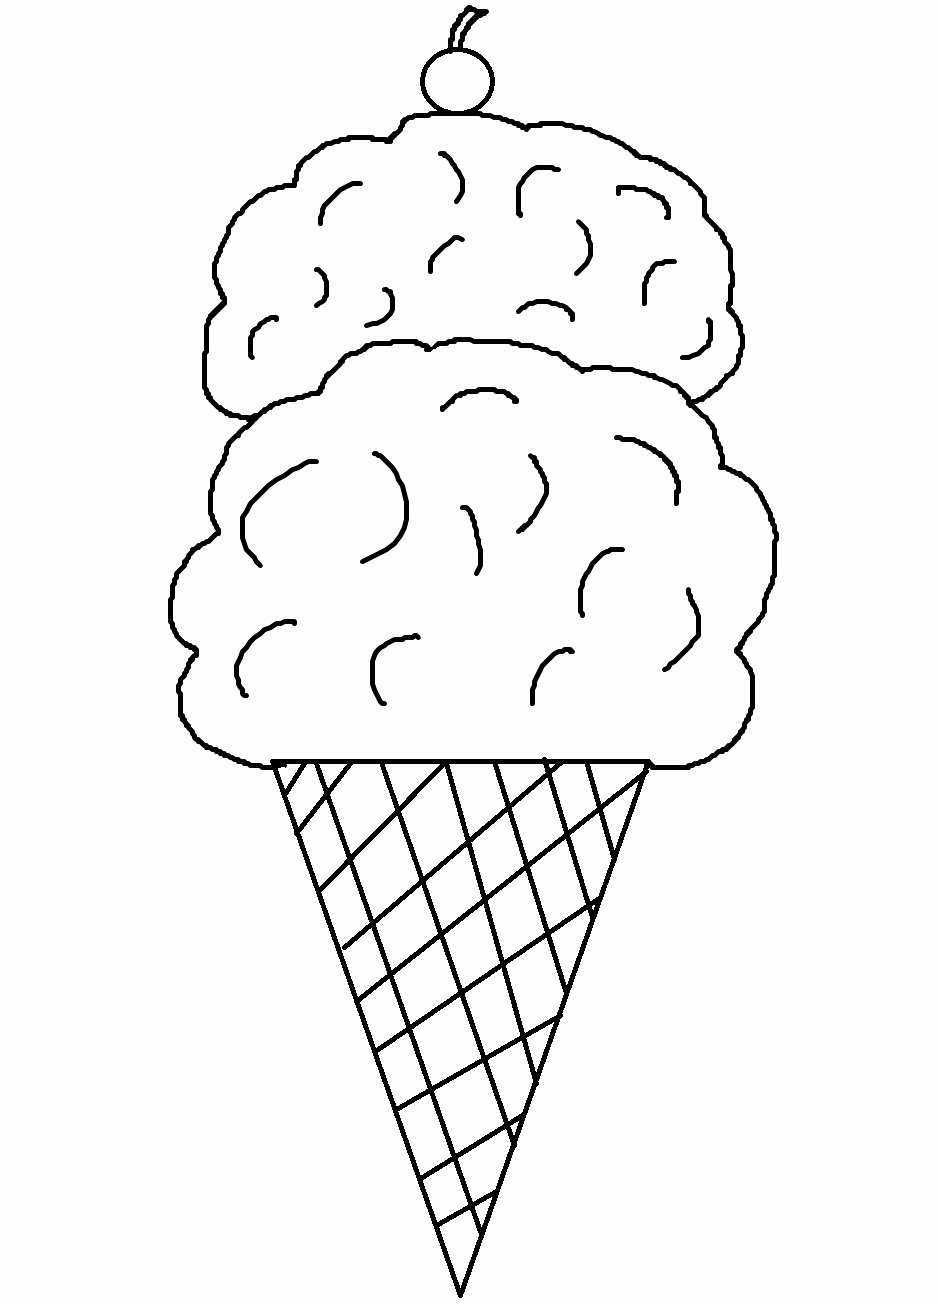 Ice Cream Scoop Coloring Pages Luxury Free Ice Cream Cone Coloring Page  Download Free Clip Art | Meriwer Coloring